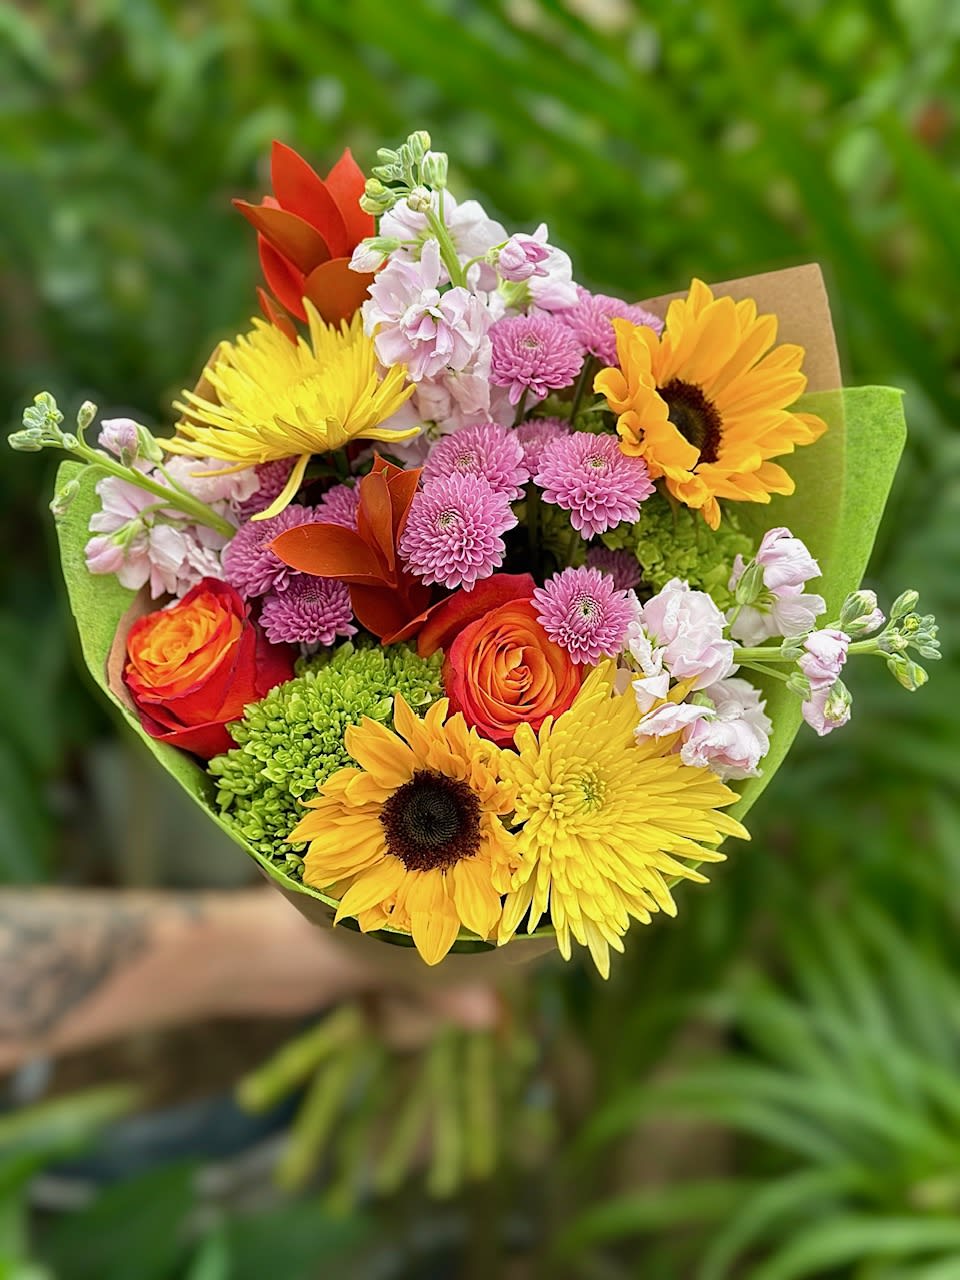 Designers Choice- Loose Flower Bundle  - Our designers will put together a beautiful, bright mix of flowers and wrap them up so you can easily drop them in a vase at home! 